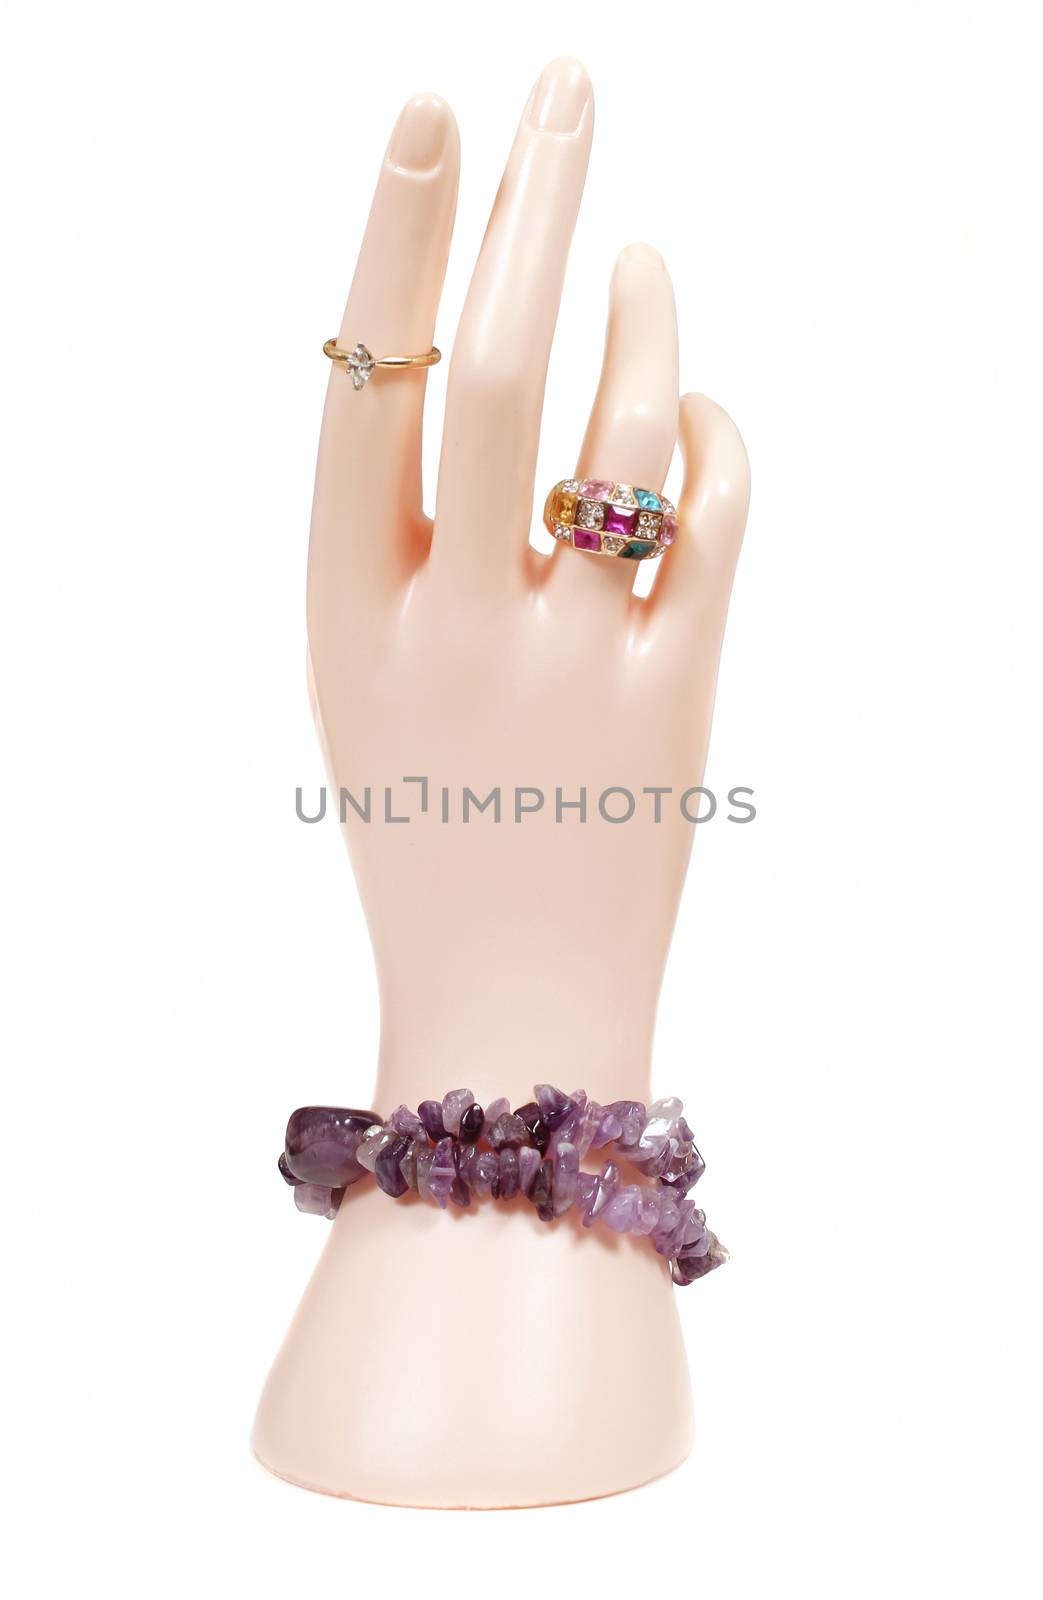 Jewelry on Mannequin Hand, Rings and Bracelet